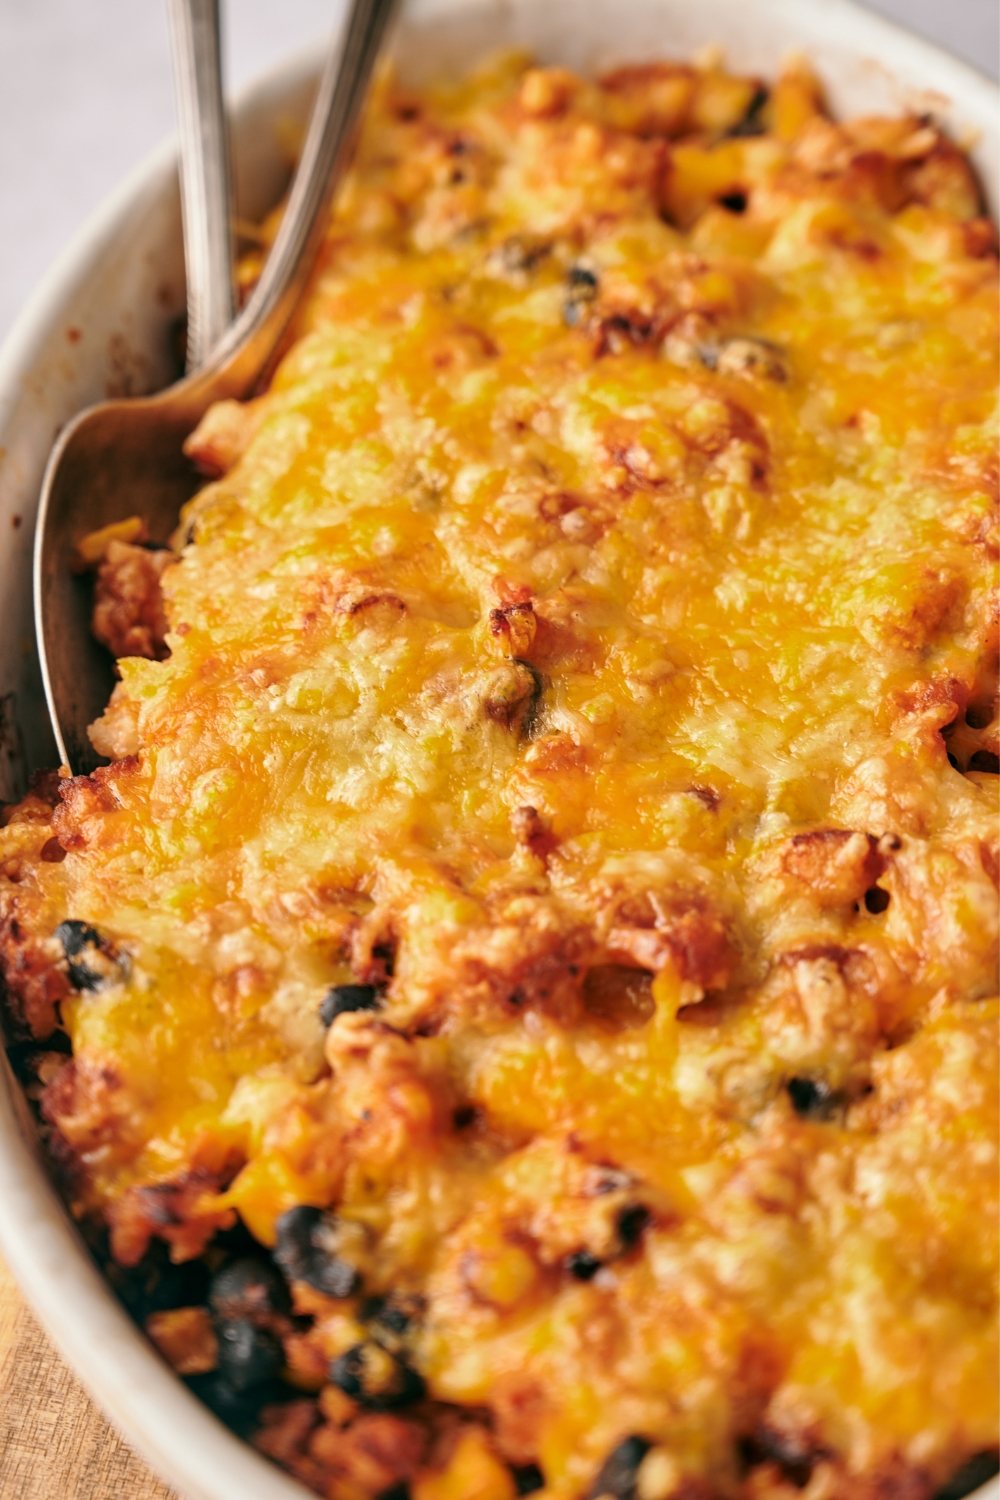 A casserole dish with baked taco rice casserole. Two serving spoons are in the dish ready to serve.